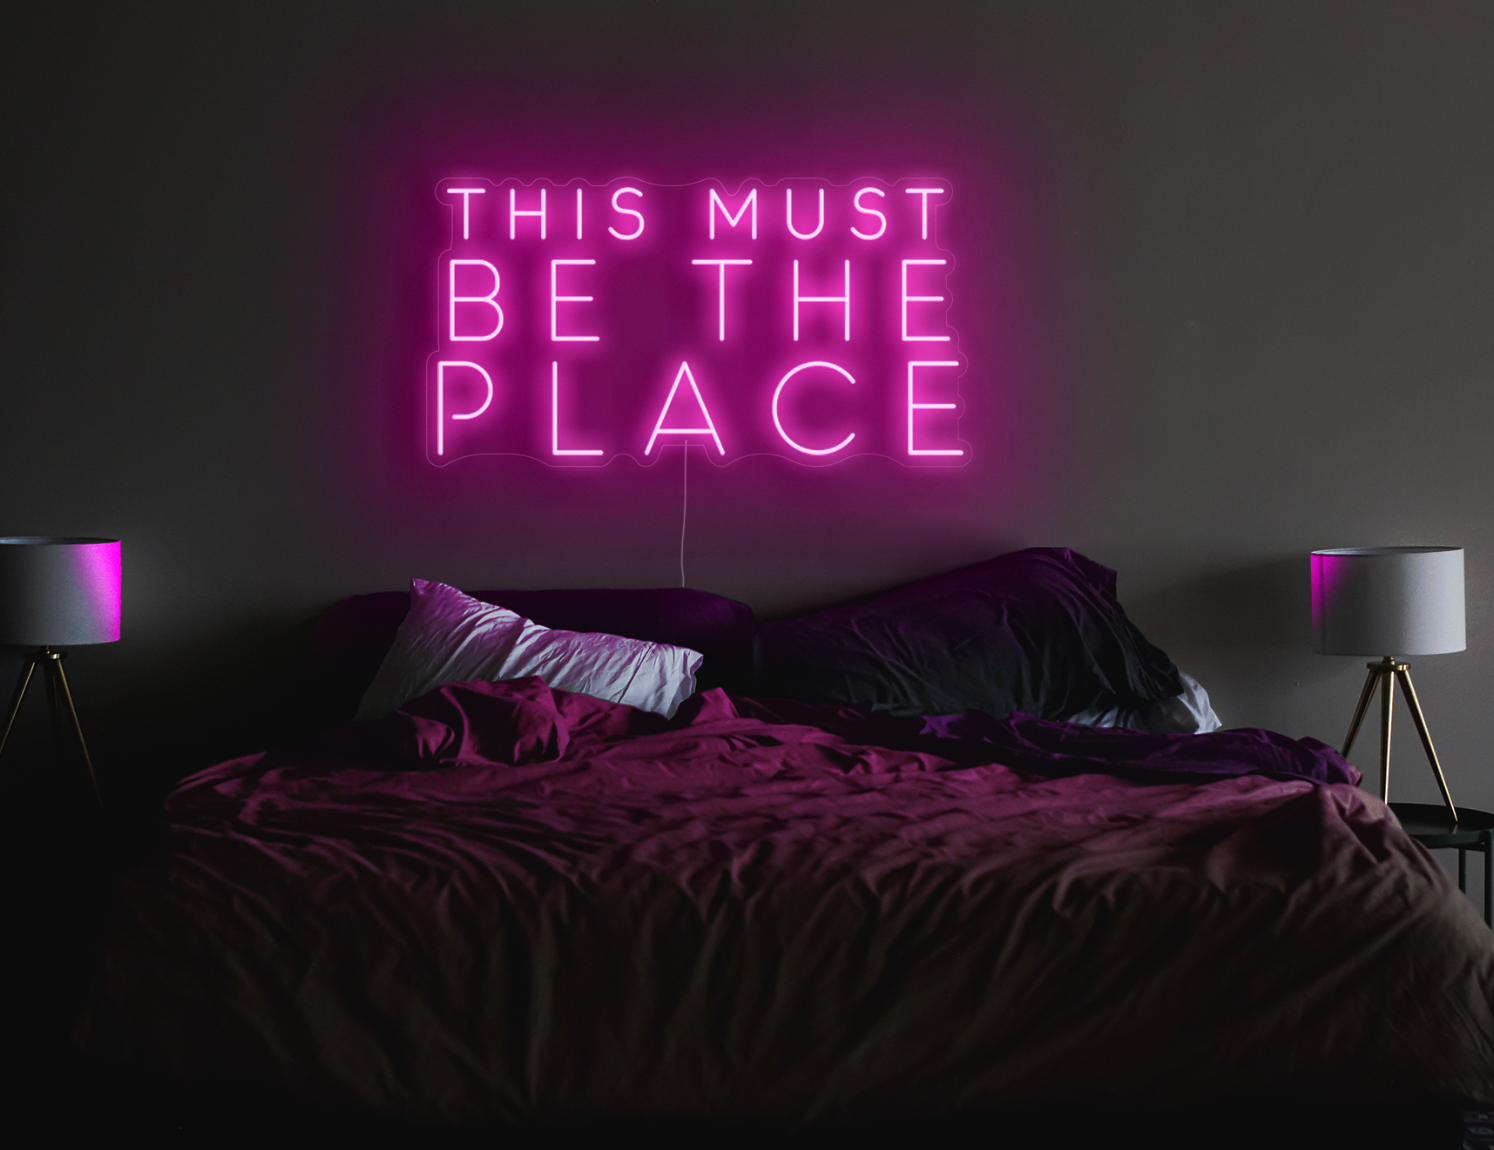 'THIS MUST BE THE PLACE'